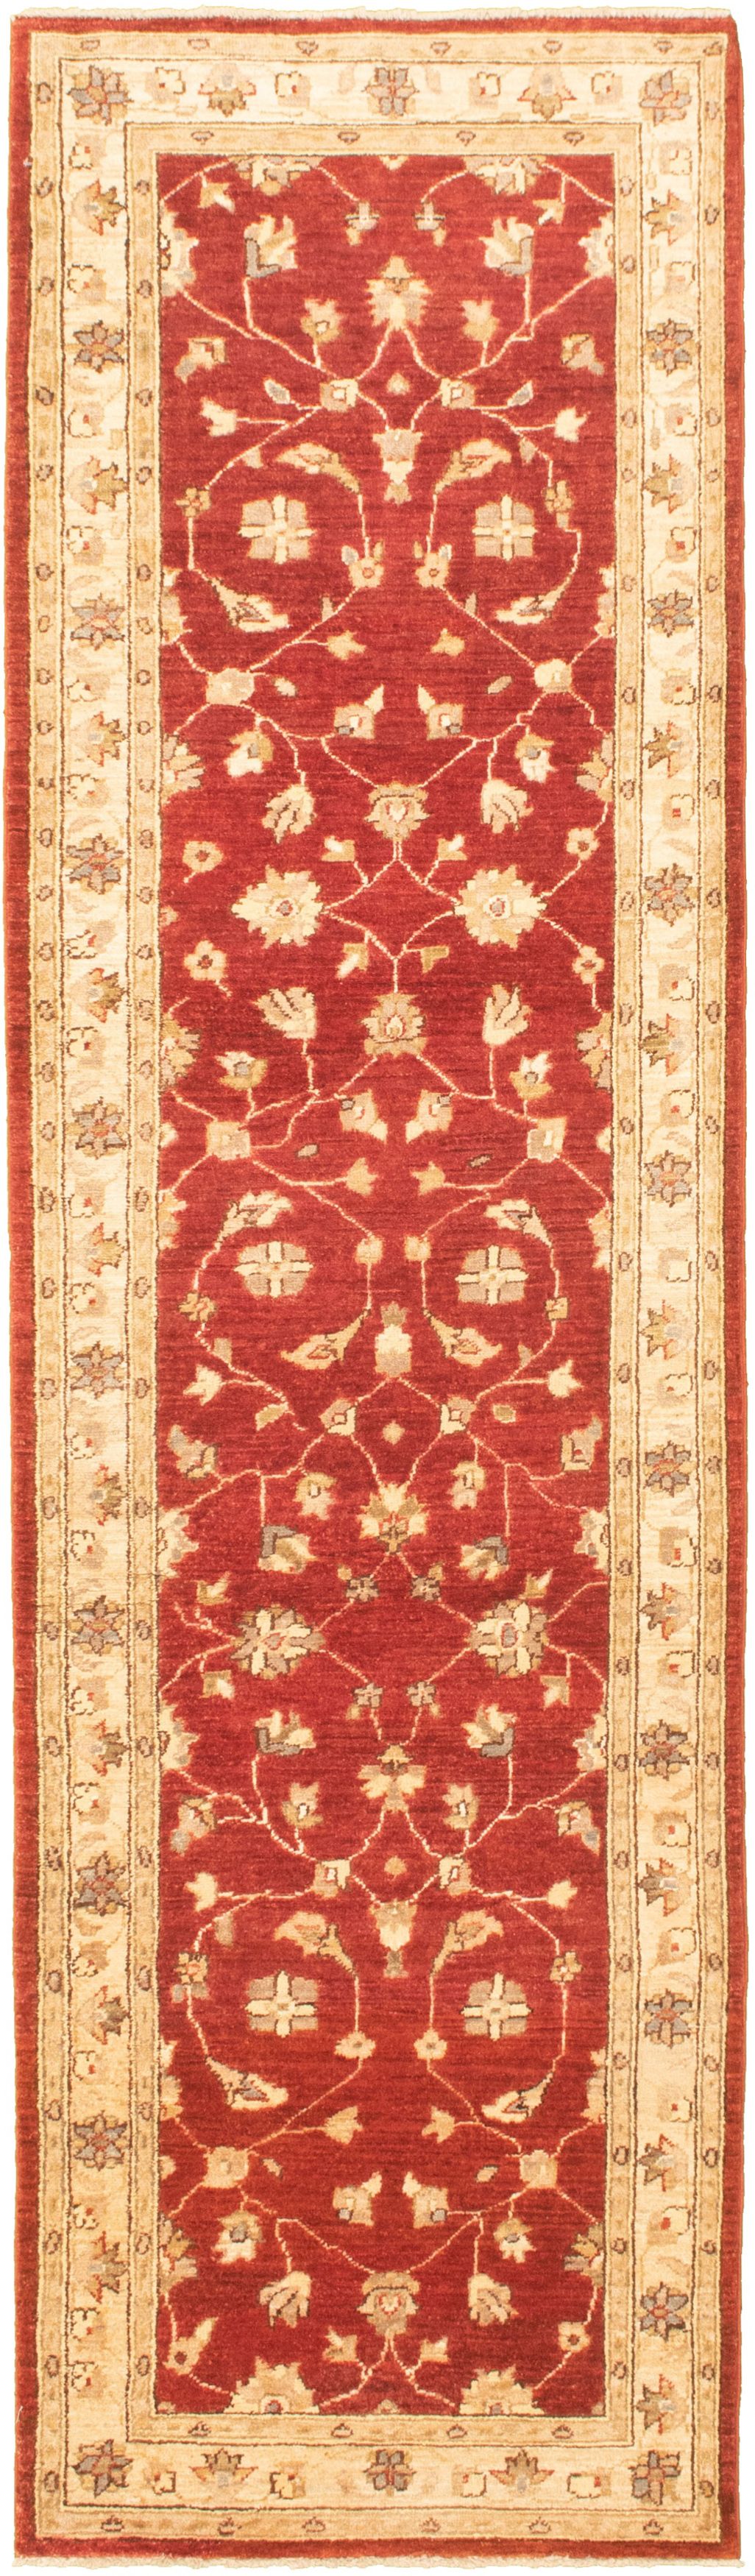 Hand-knotted Chobi Finest Burgundy Wool Rug 2'8" x 9'10" Size: 2'8" x 9'10"  